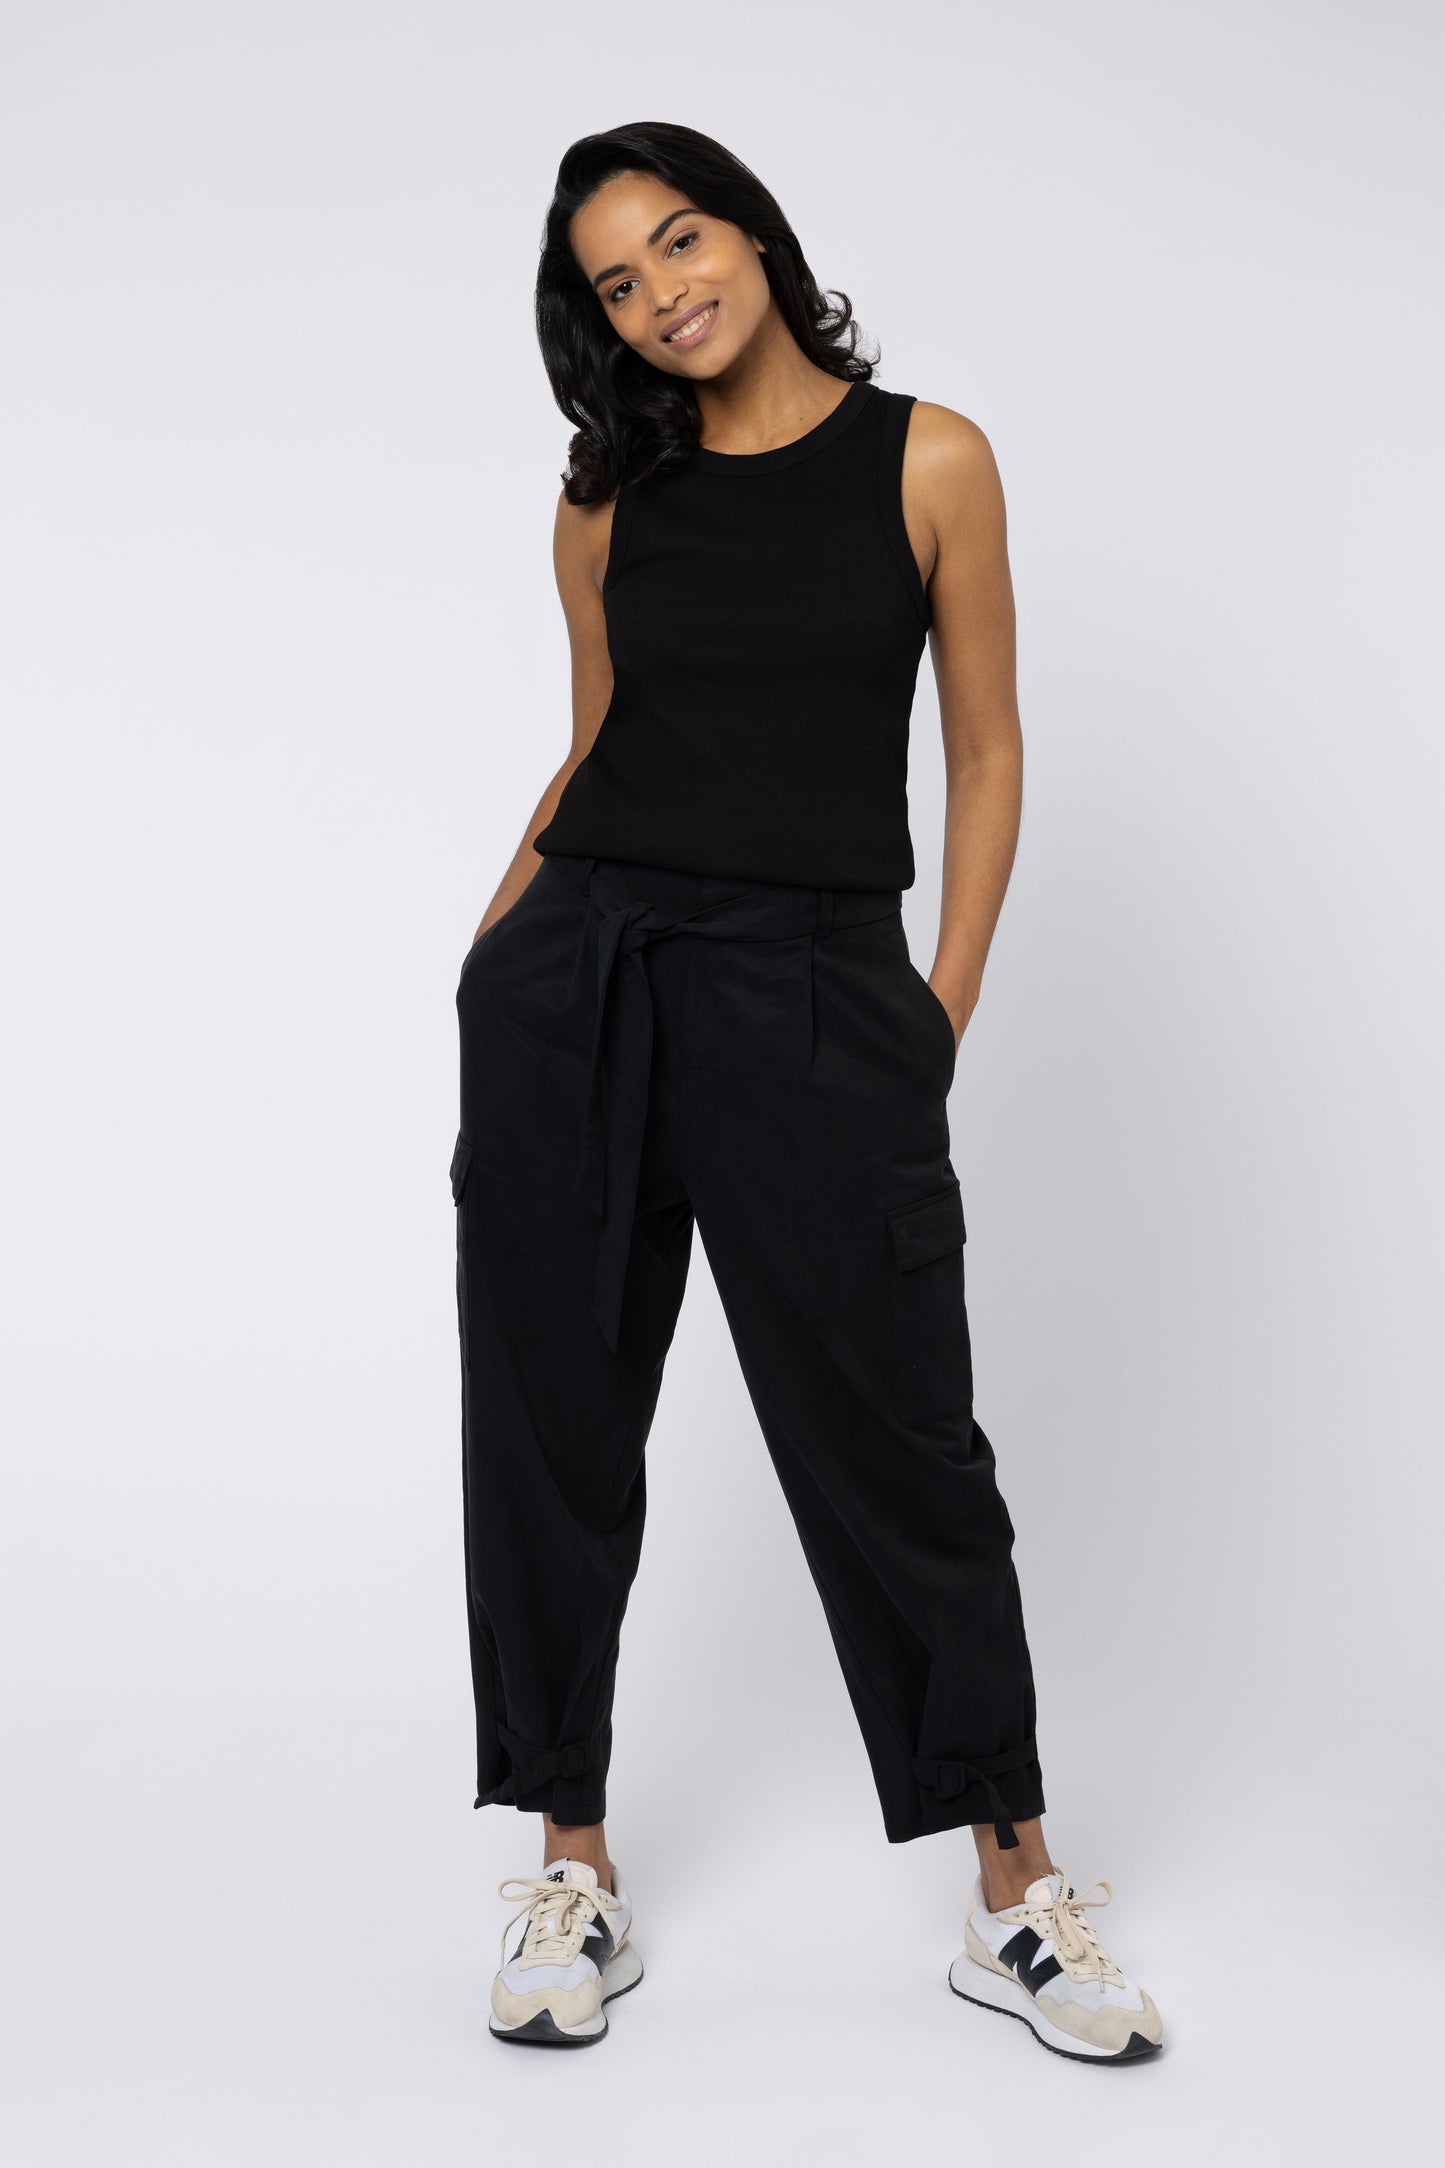 CHARLOTTE CARGO TROUSER BLACK CARGO TROUSERS SUSTAINABLE CAGO PANTS SPRING ELEVENLOVES